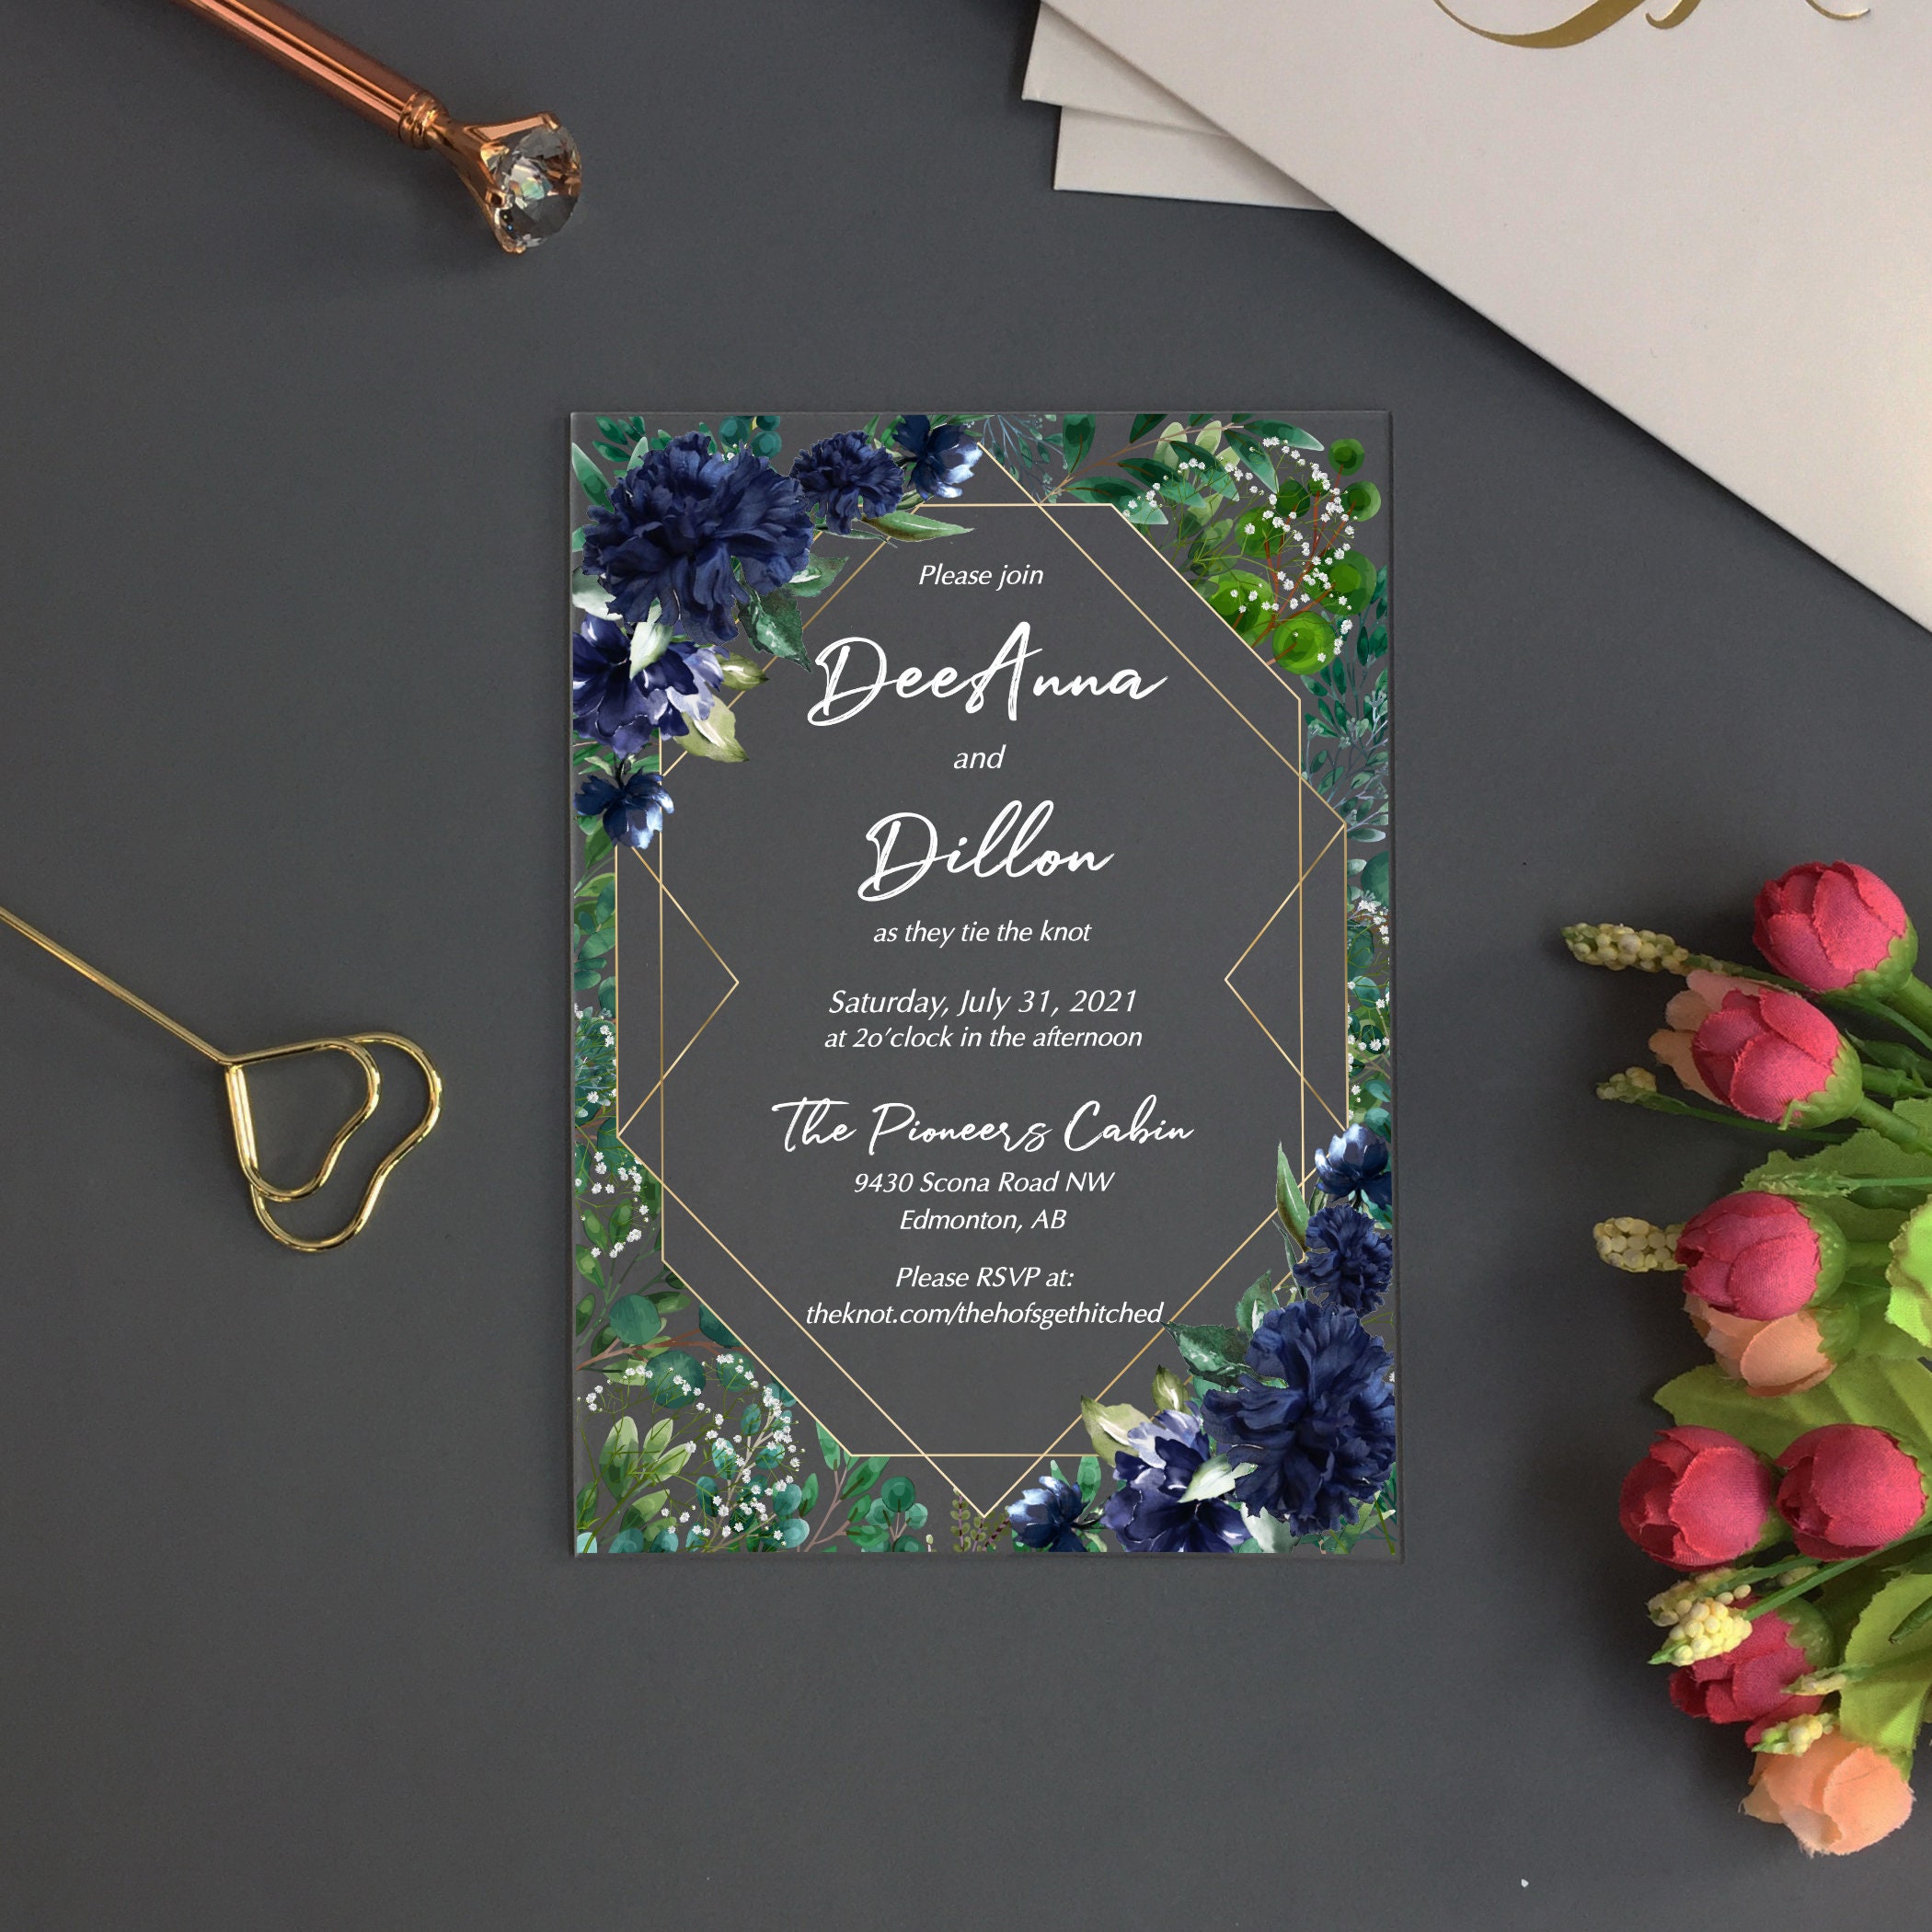 Enchanted Forest Acrylic Wedding Invitations with White Peonies and Roses -  GL23